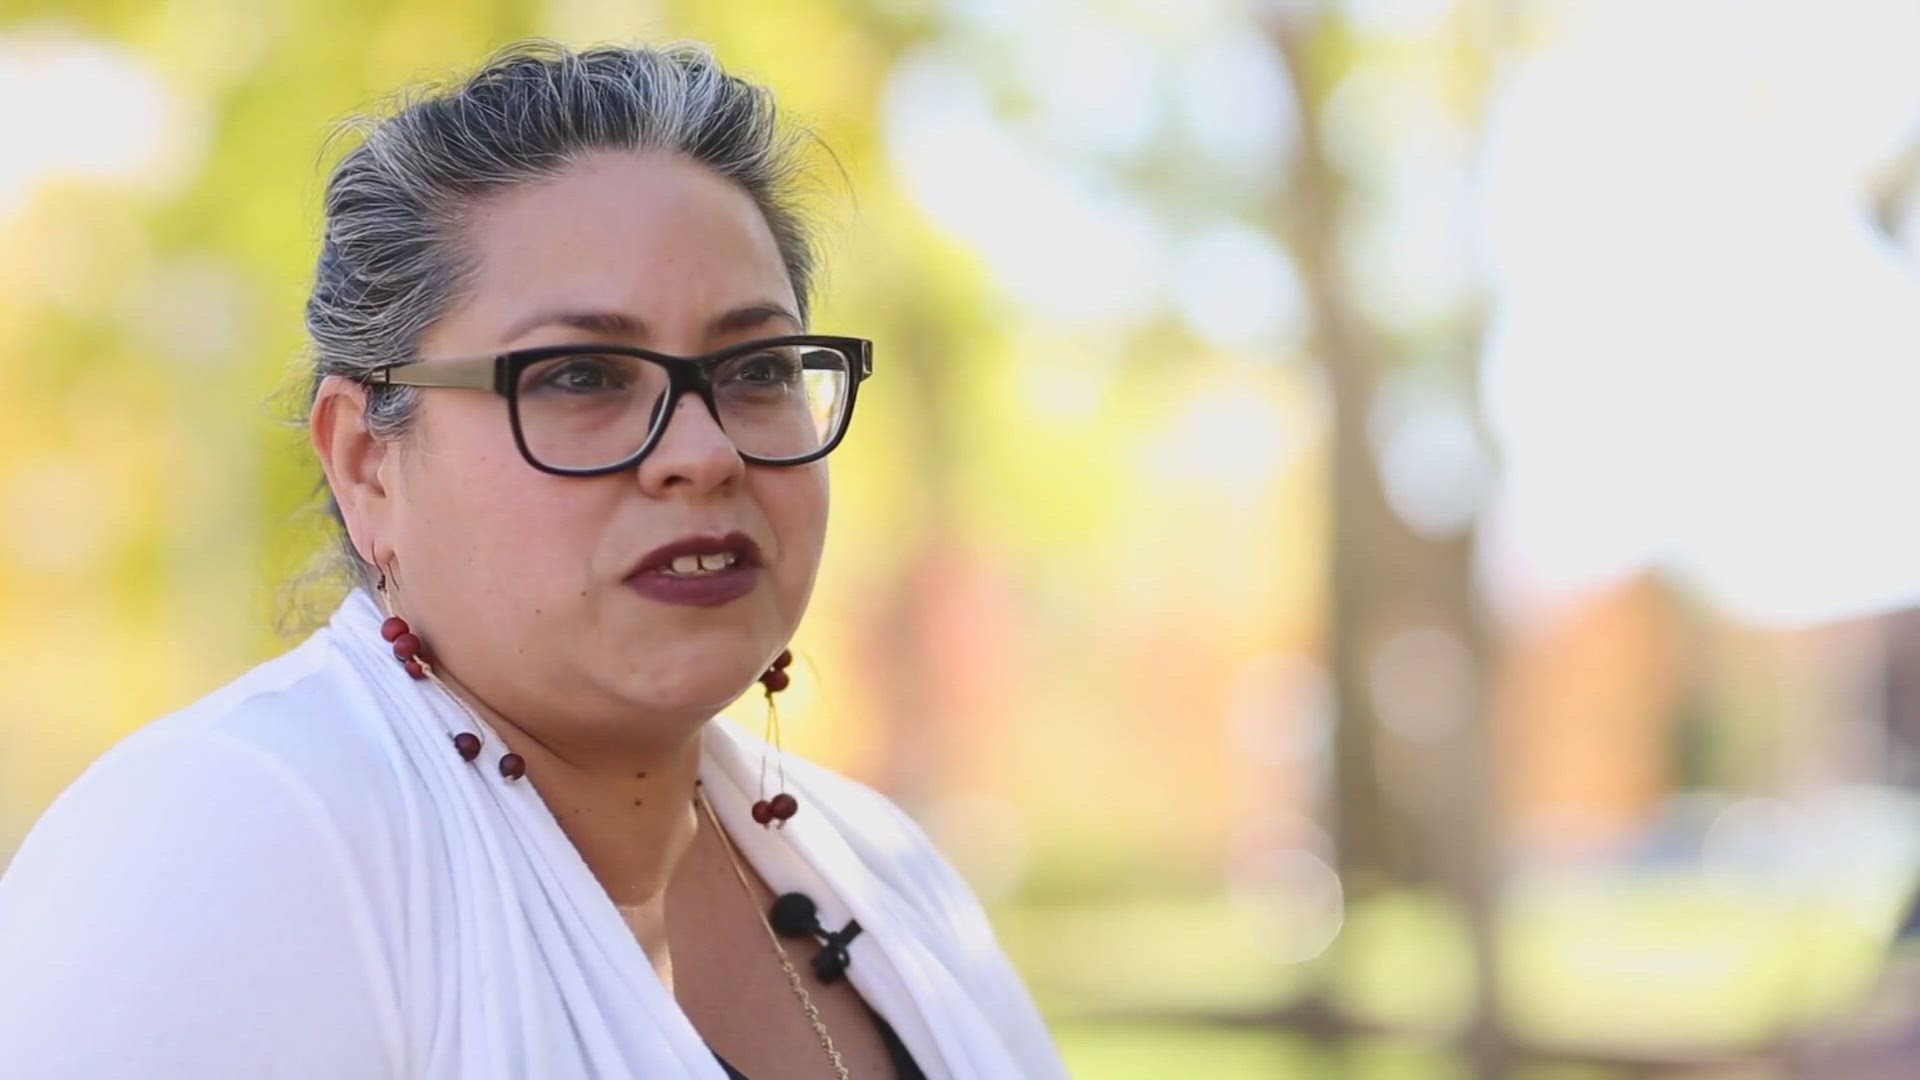 A long-time educator of Chicano Studies was removed as chair of the department. Students say the decision went too far and hurts the Hispanic community.